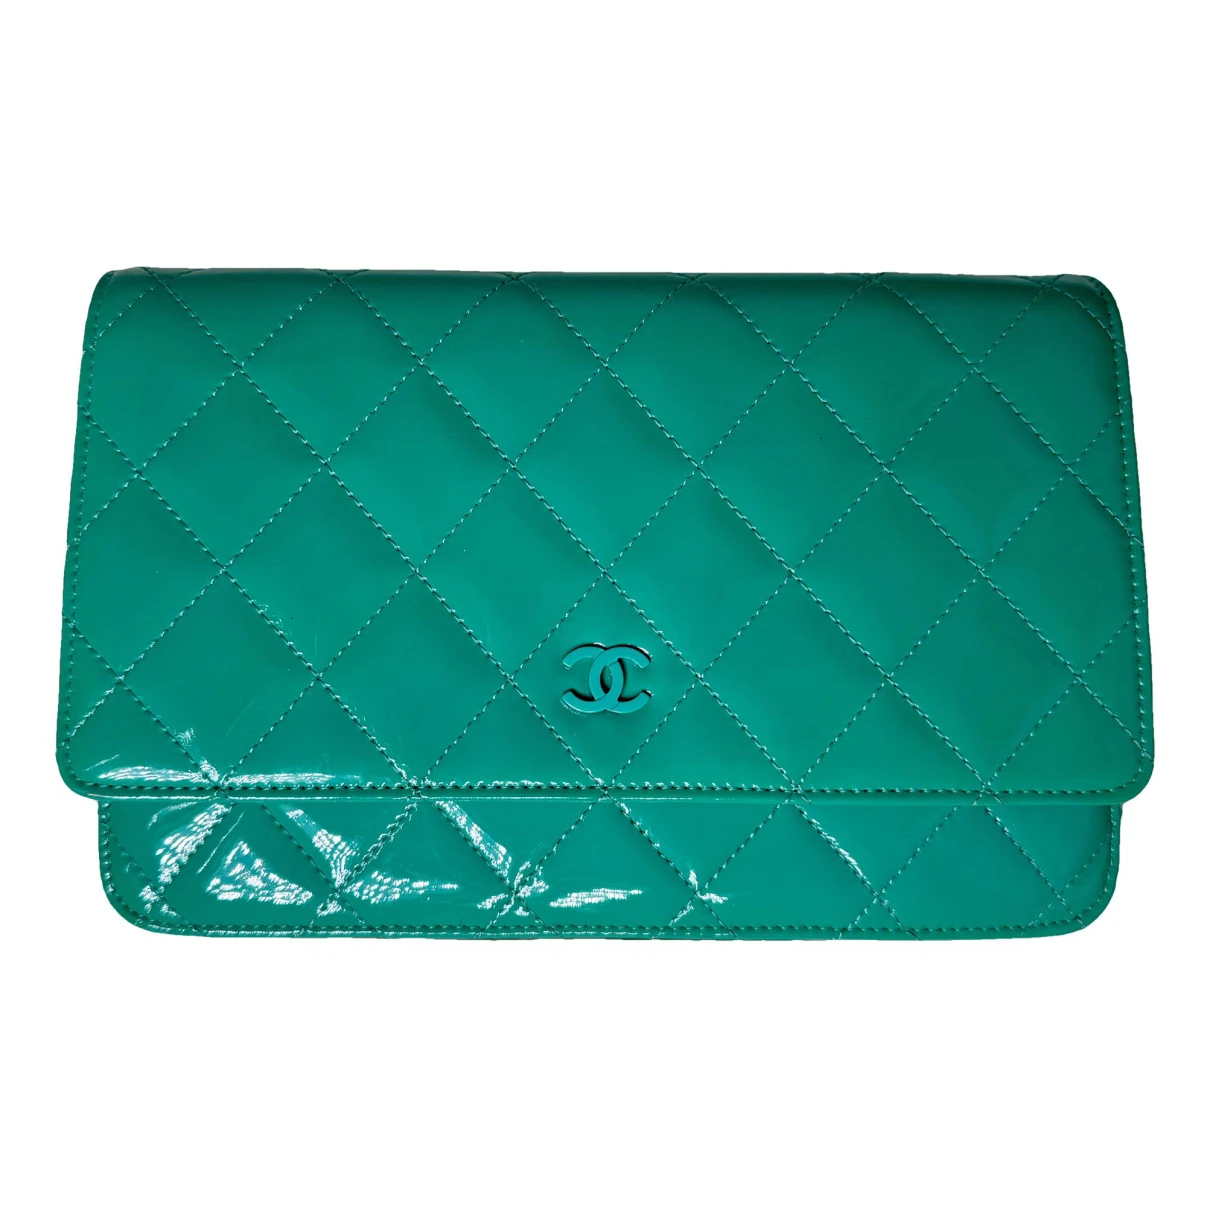 Pre-owned Chanel Patent Leather Crossbody Bag In Green